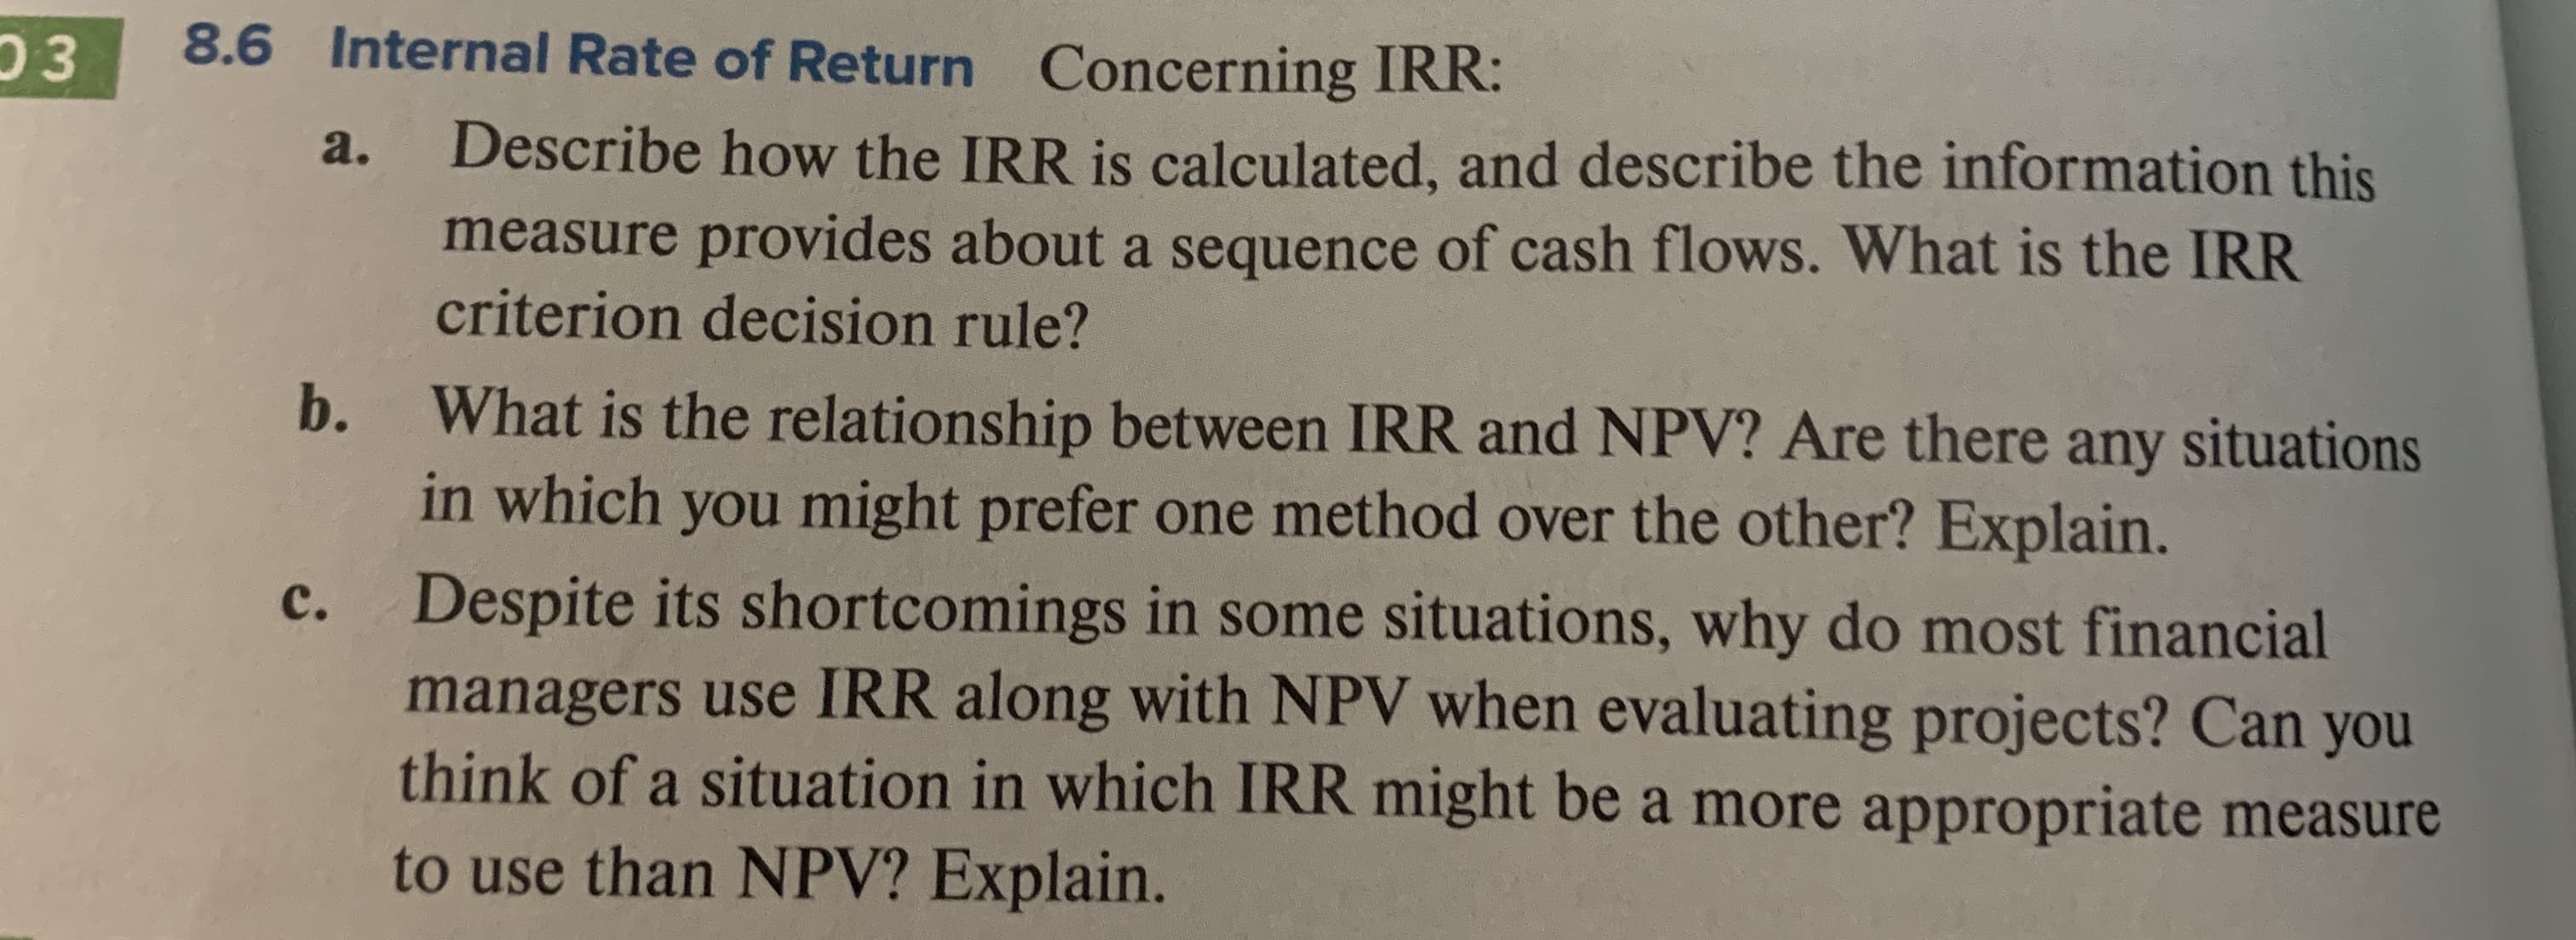 8.6 Internal Rate of Return
03
Concerning IRR:
Describe how the IRR is calculated, and describe the information this
measure provides about a sequence of cash flows. What is the IRR
criterion decision rule?
a.
b.
What is the relationship between IRR and NPV? Are there any situations
in which you might prefer one method over the other? Explain.
Despite its shortcomings in some situations, why do most financial
managers use IRR along with NPV when evaluating projects? Can you
think of a situation in which IRR might be a more appropriate measure
с.
to use than NPV? Explain.
